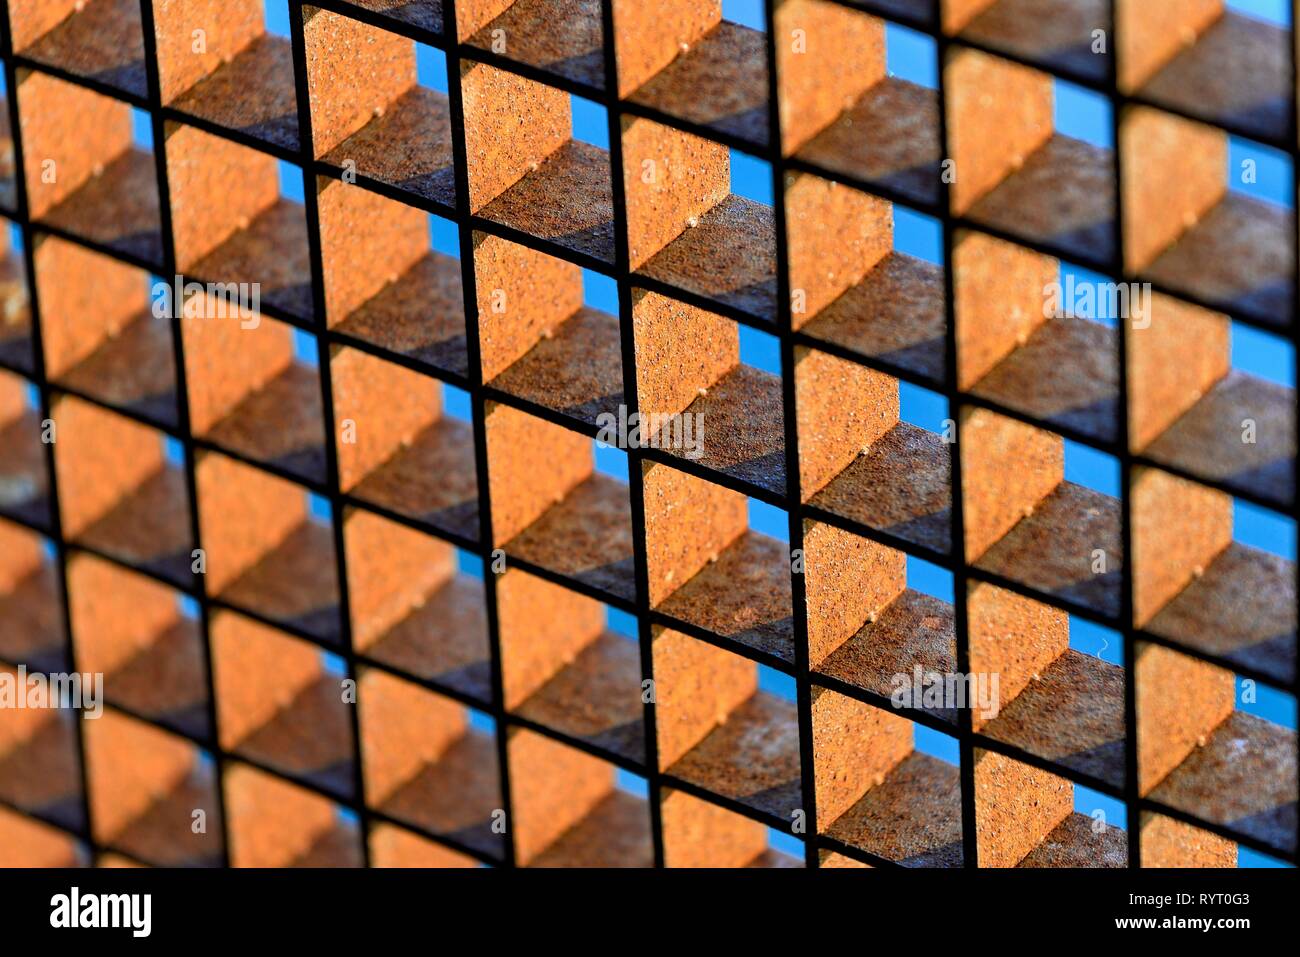 Rusty grid against a blue sky, background image, Germany Stock Photo